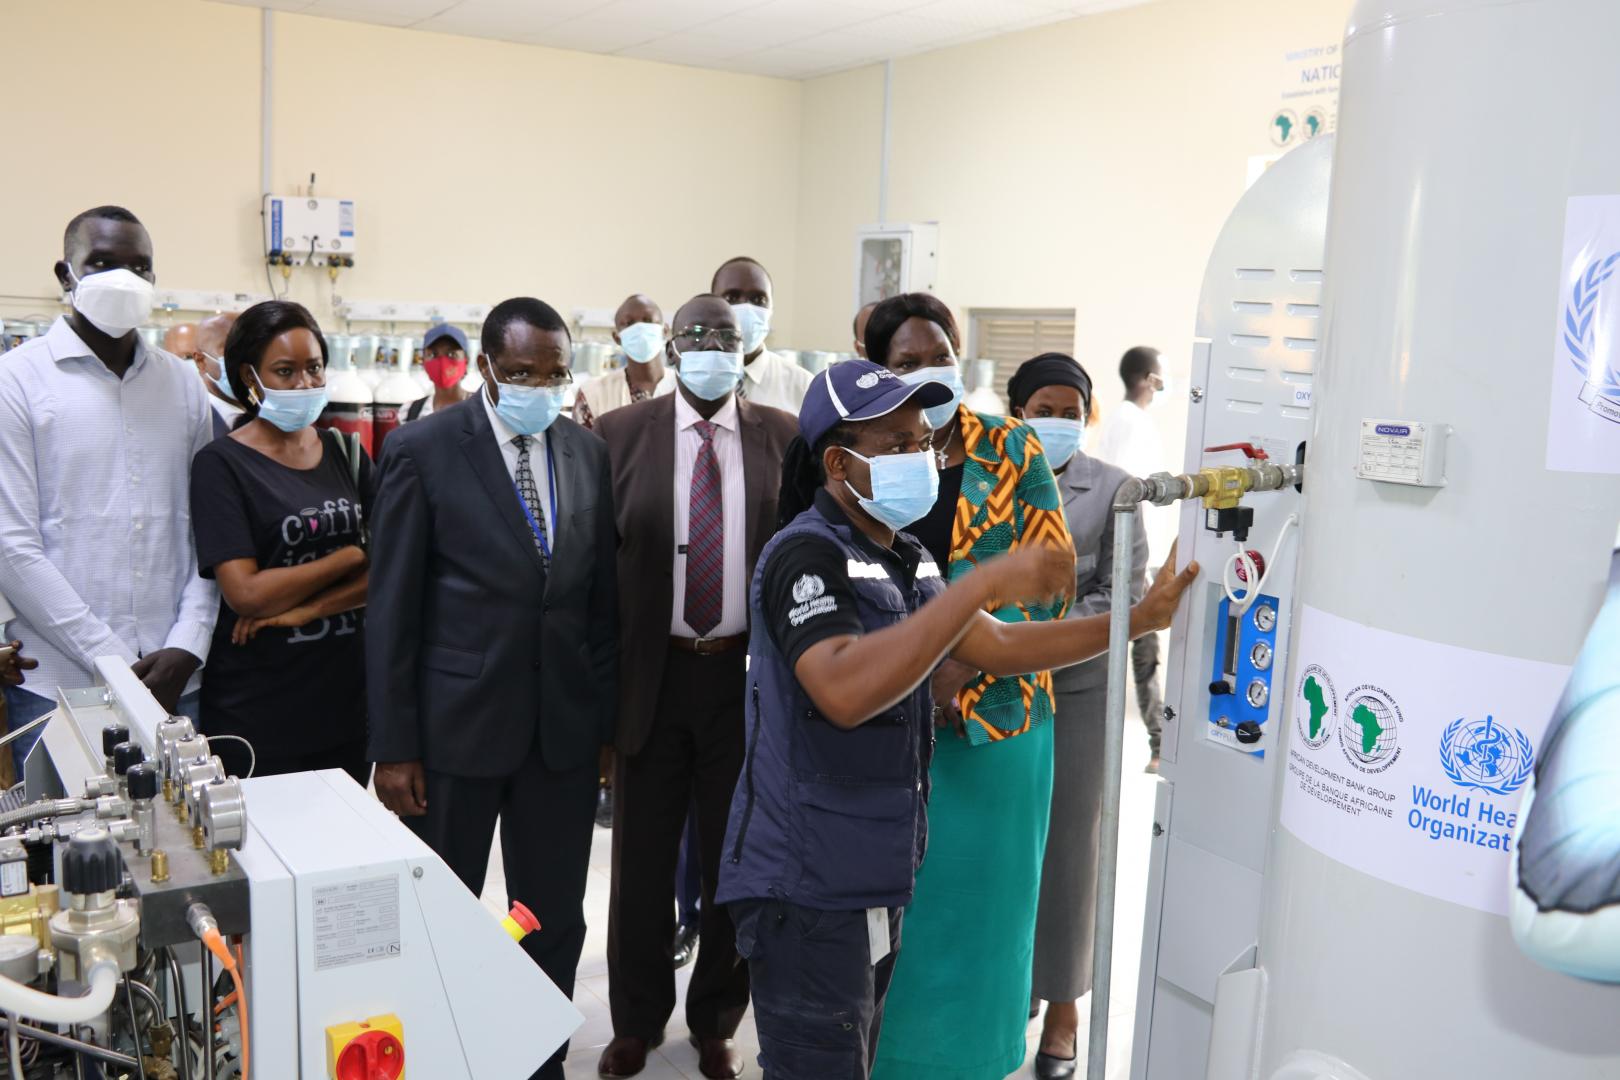 South Sudan has begun producing oxygen following the successful installation of the country’s first oxygen plant at Juba Teaching Hospital